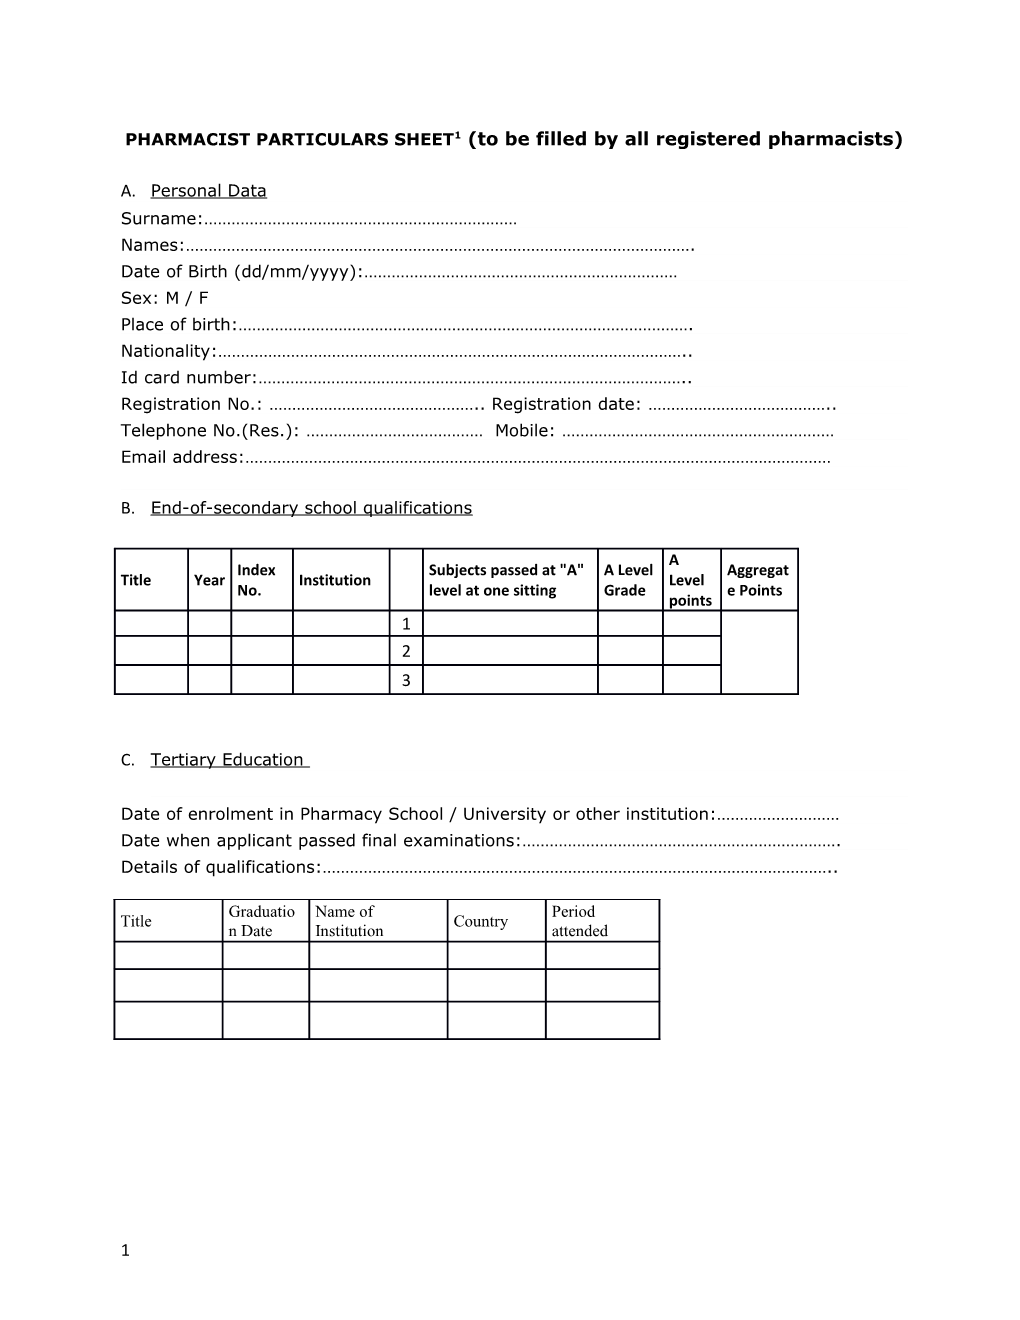 PHARMACIST PARTICULARS SHEET1 (To Be Filled by All Registered Pharmacists)